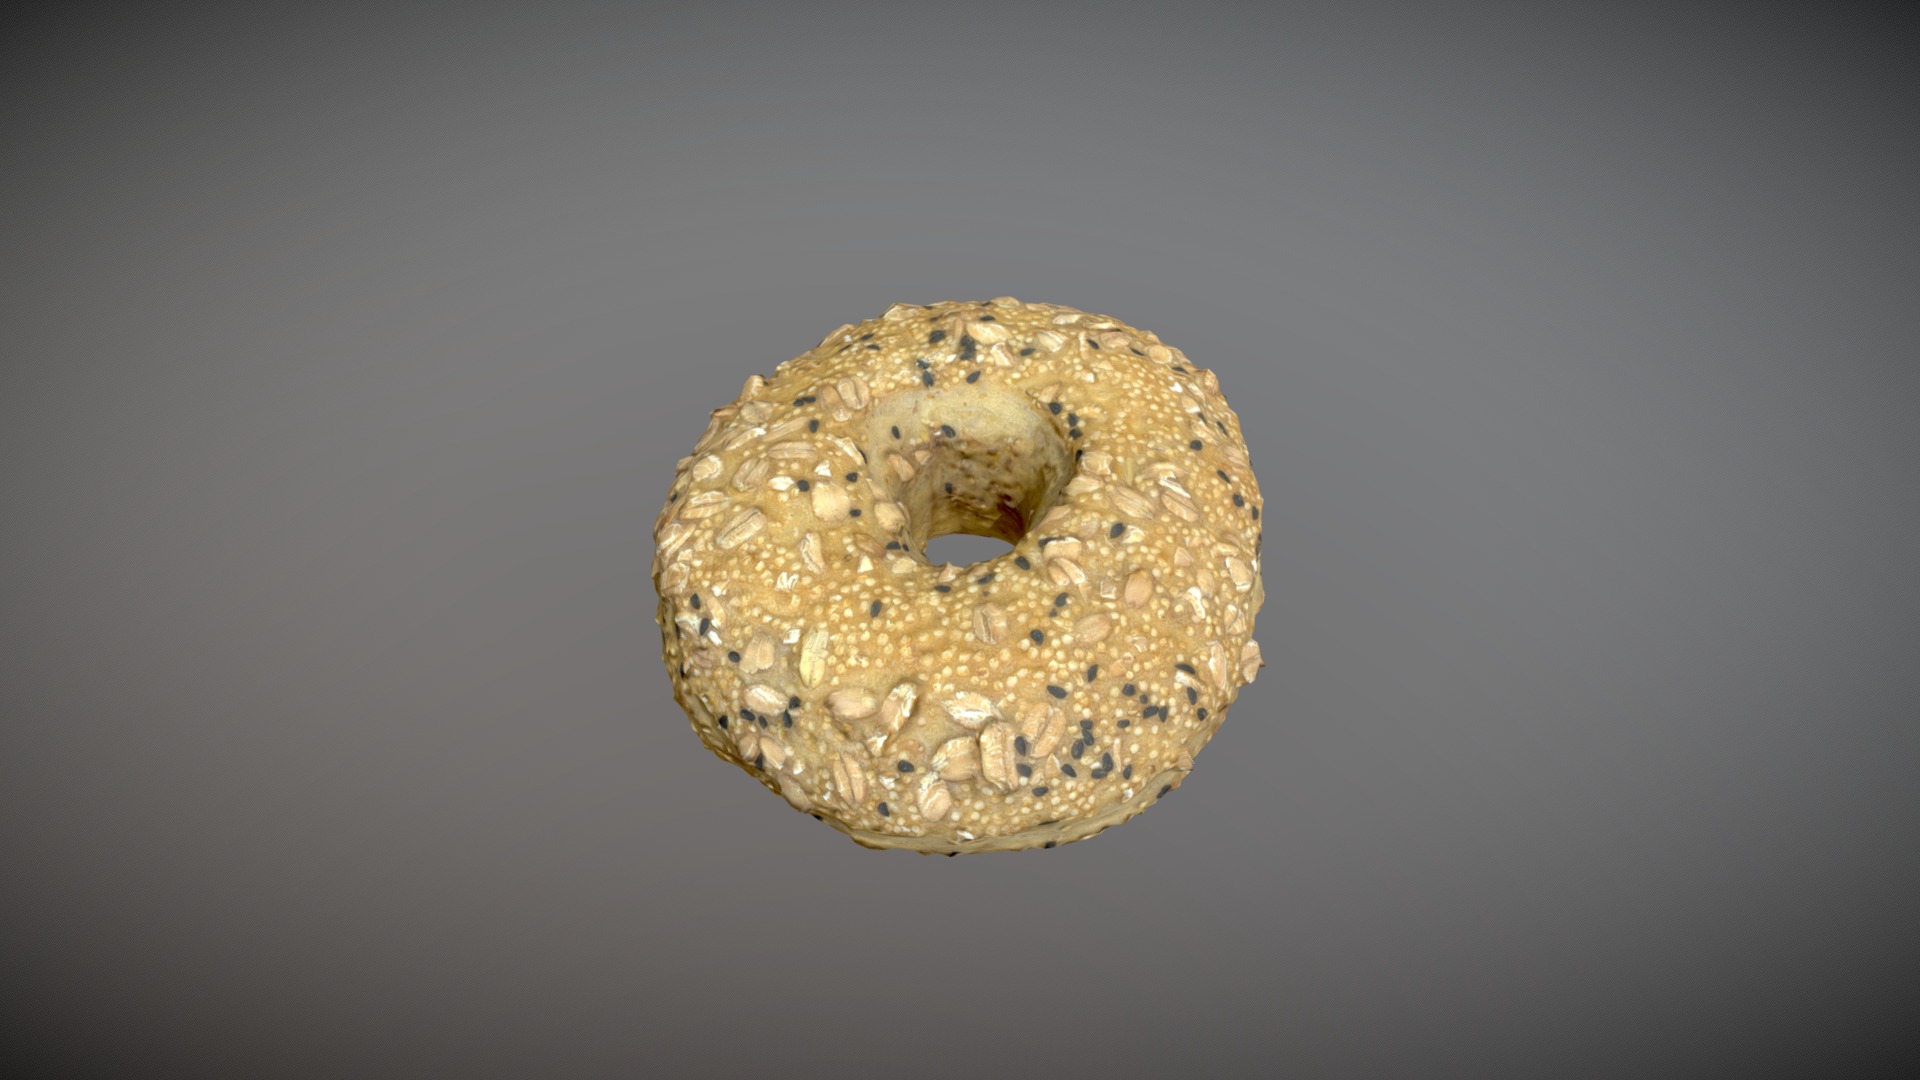 3D model 3D Scan Bagel Low Poly Model - This is a 3D model of the 3D Scan Bagel Low Poly Model. The 3D model is about a doughnut with sprinkles on it.